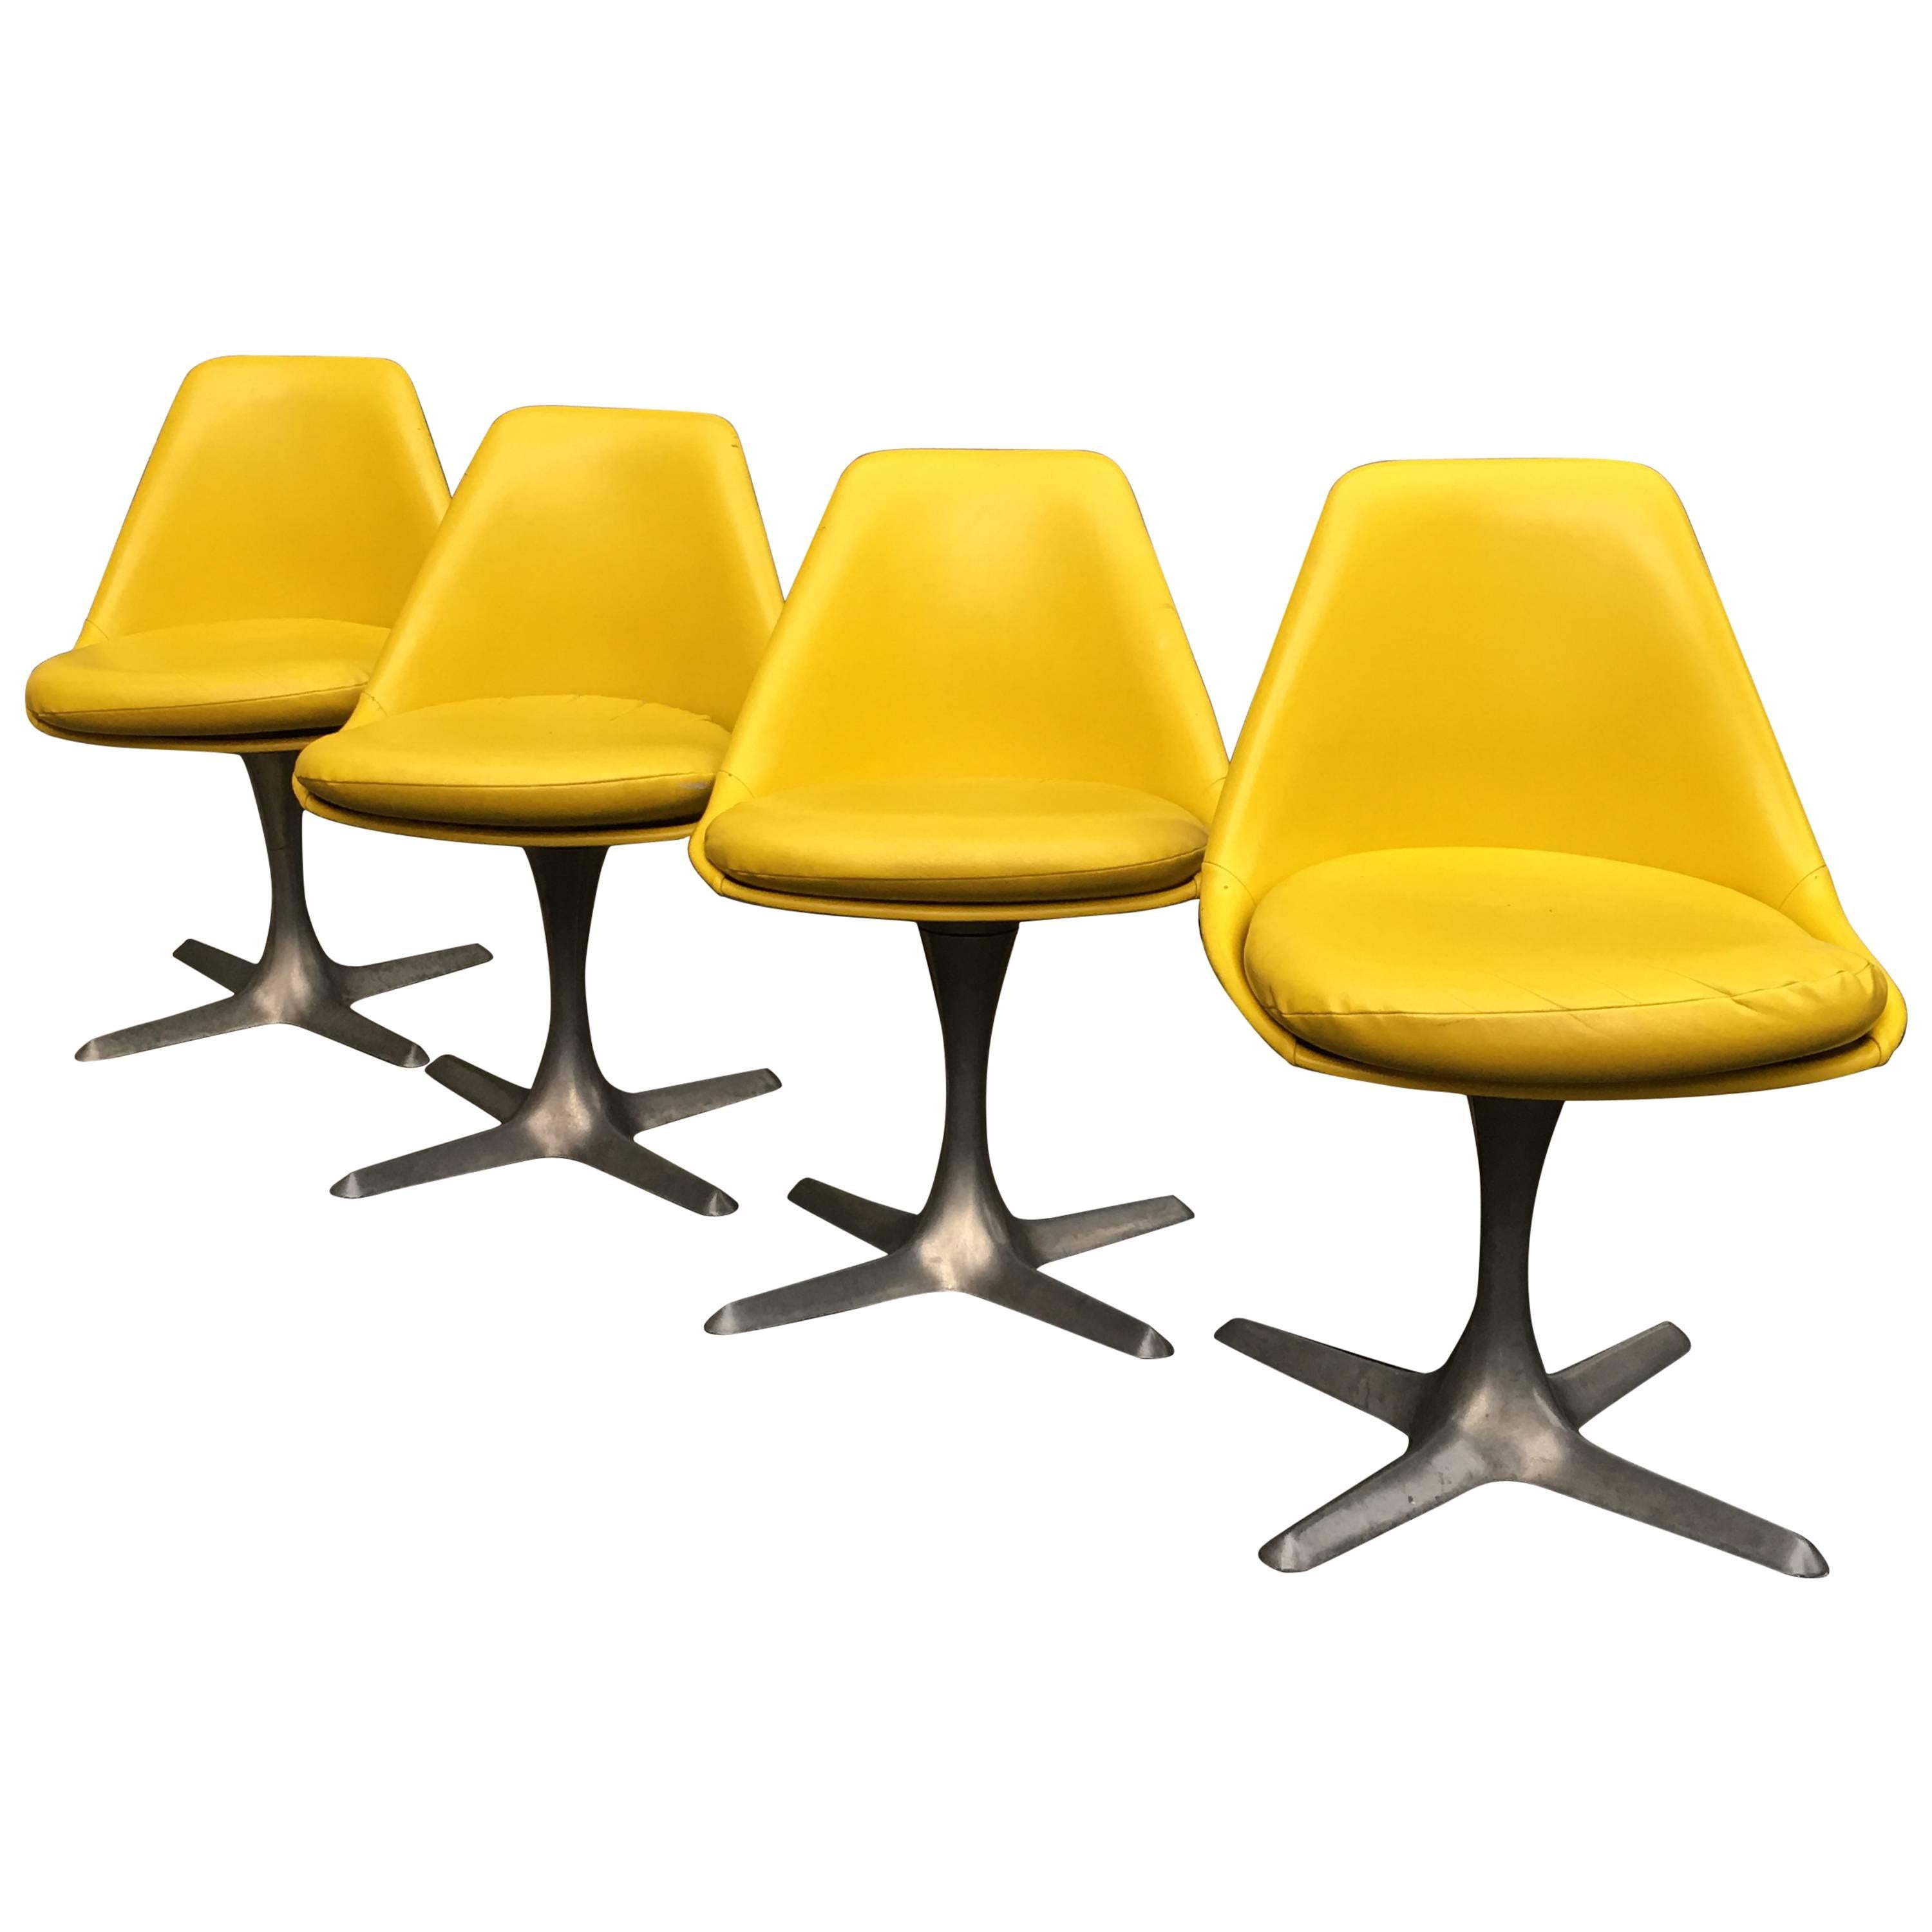 Four Maurice Burke for Arkana Yellow Dining Chairs